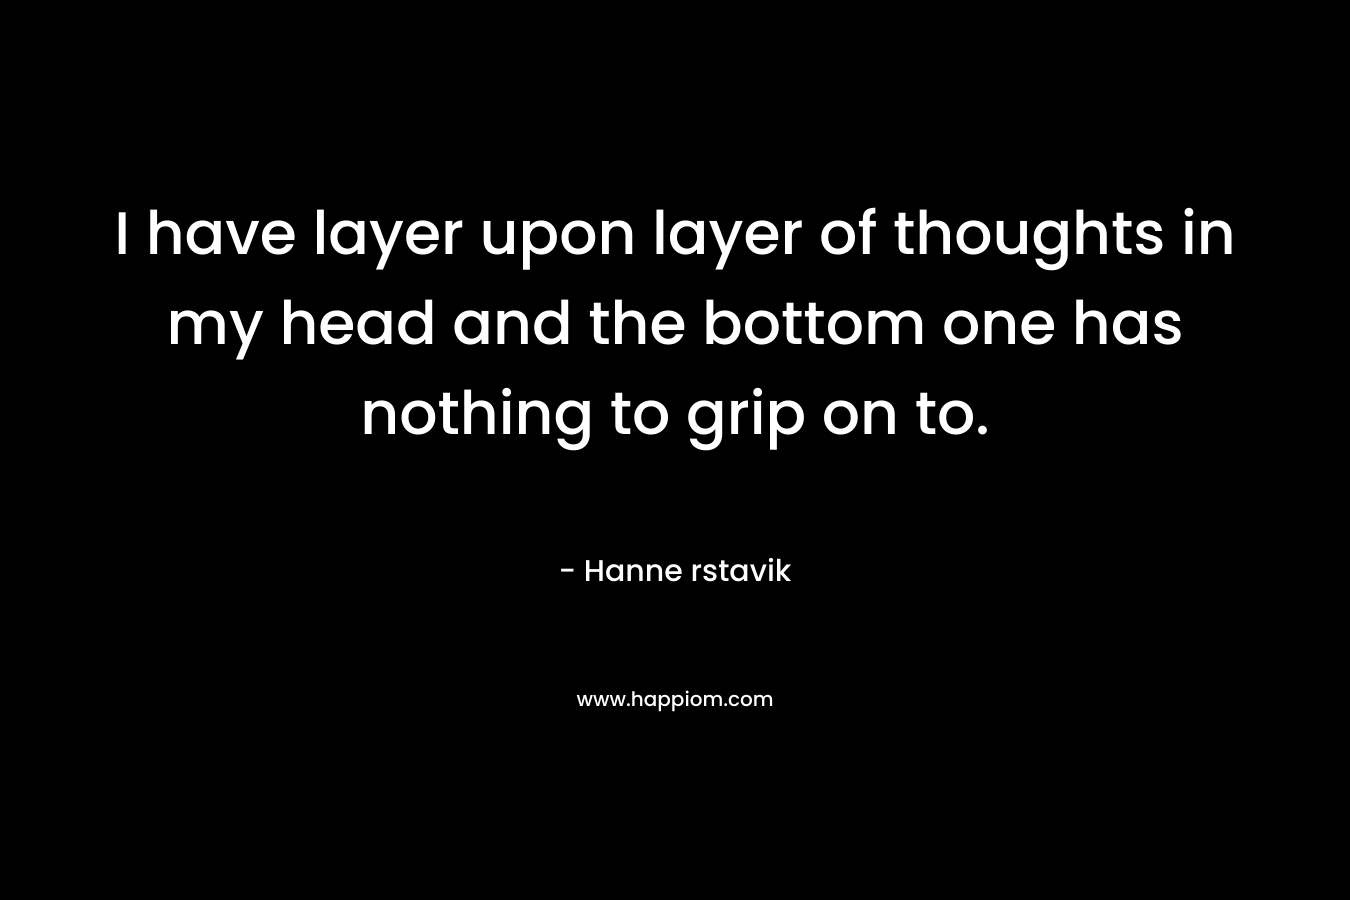 I have layer upon layer of thoughts in my head and the bottom one has nothing to grip on to. – Hanne rstavik